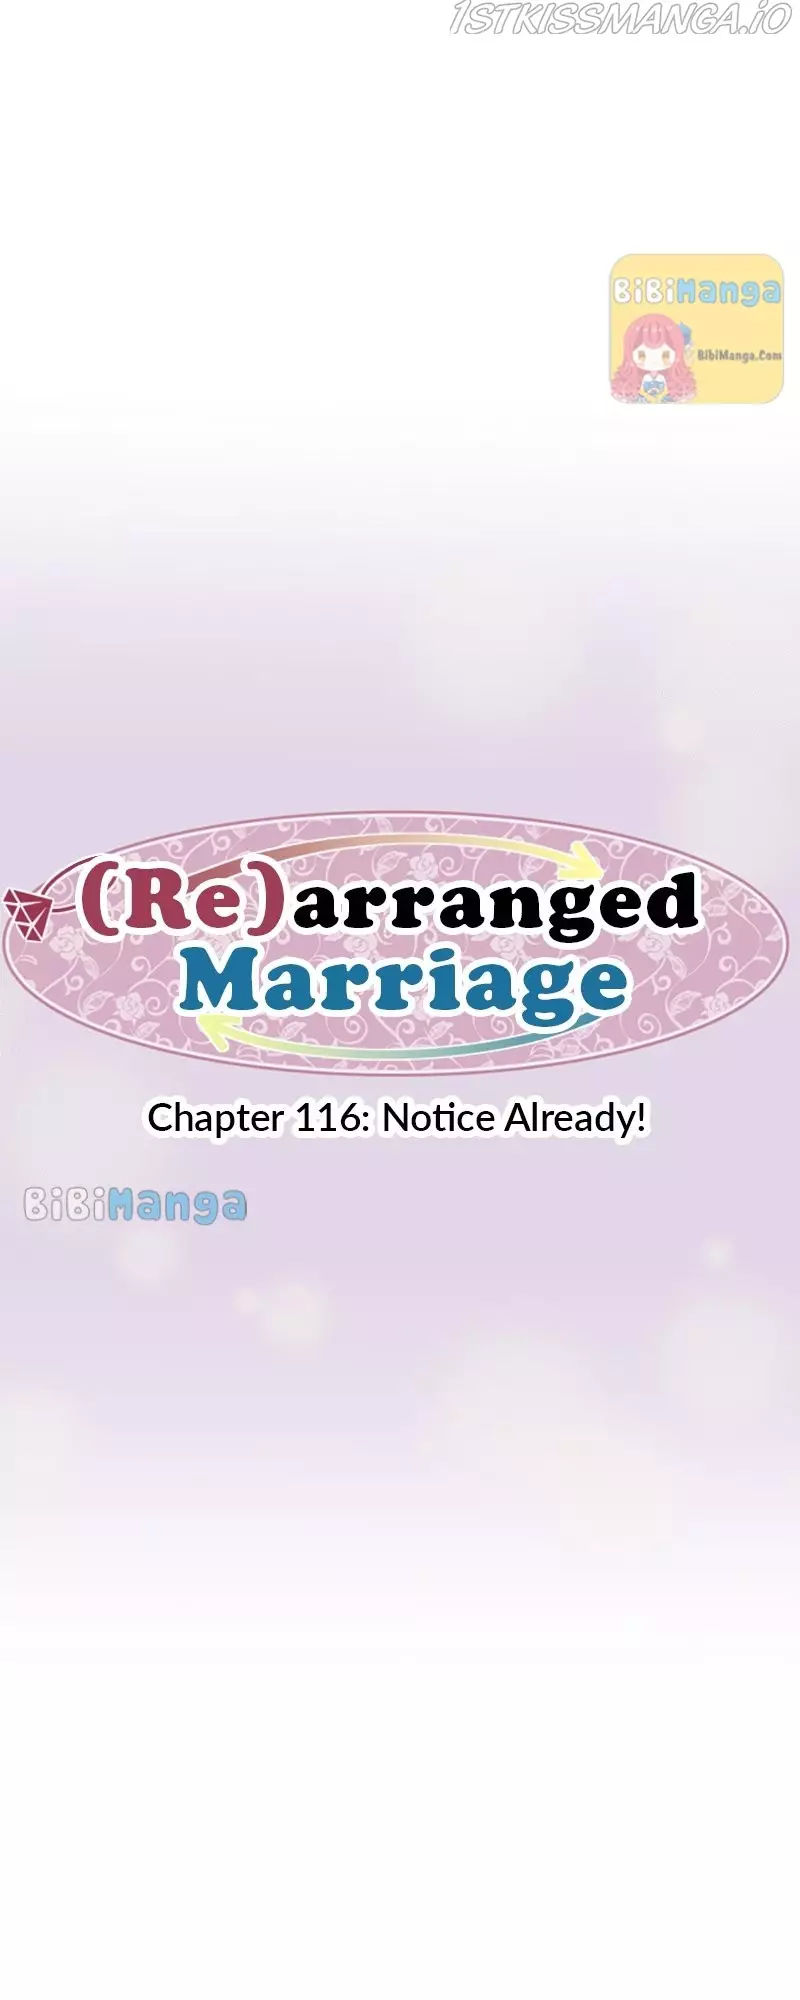 (Re)Arranged Marriage - 116 page 6-2a637c69